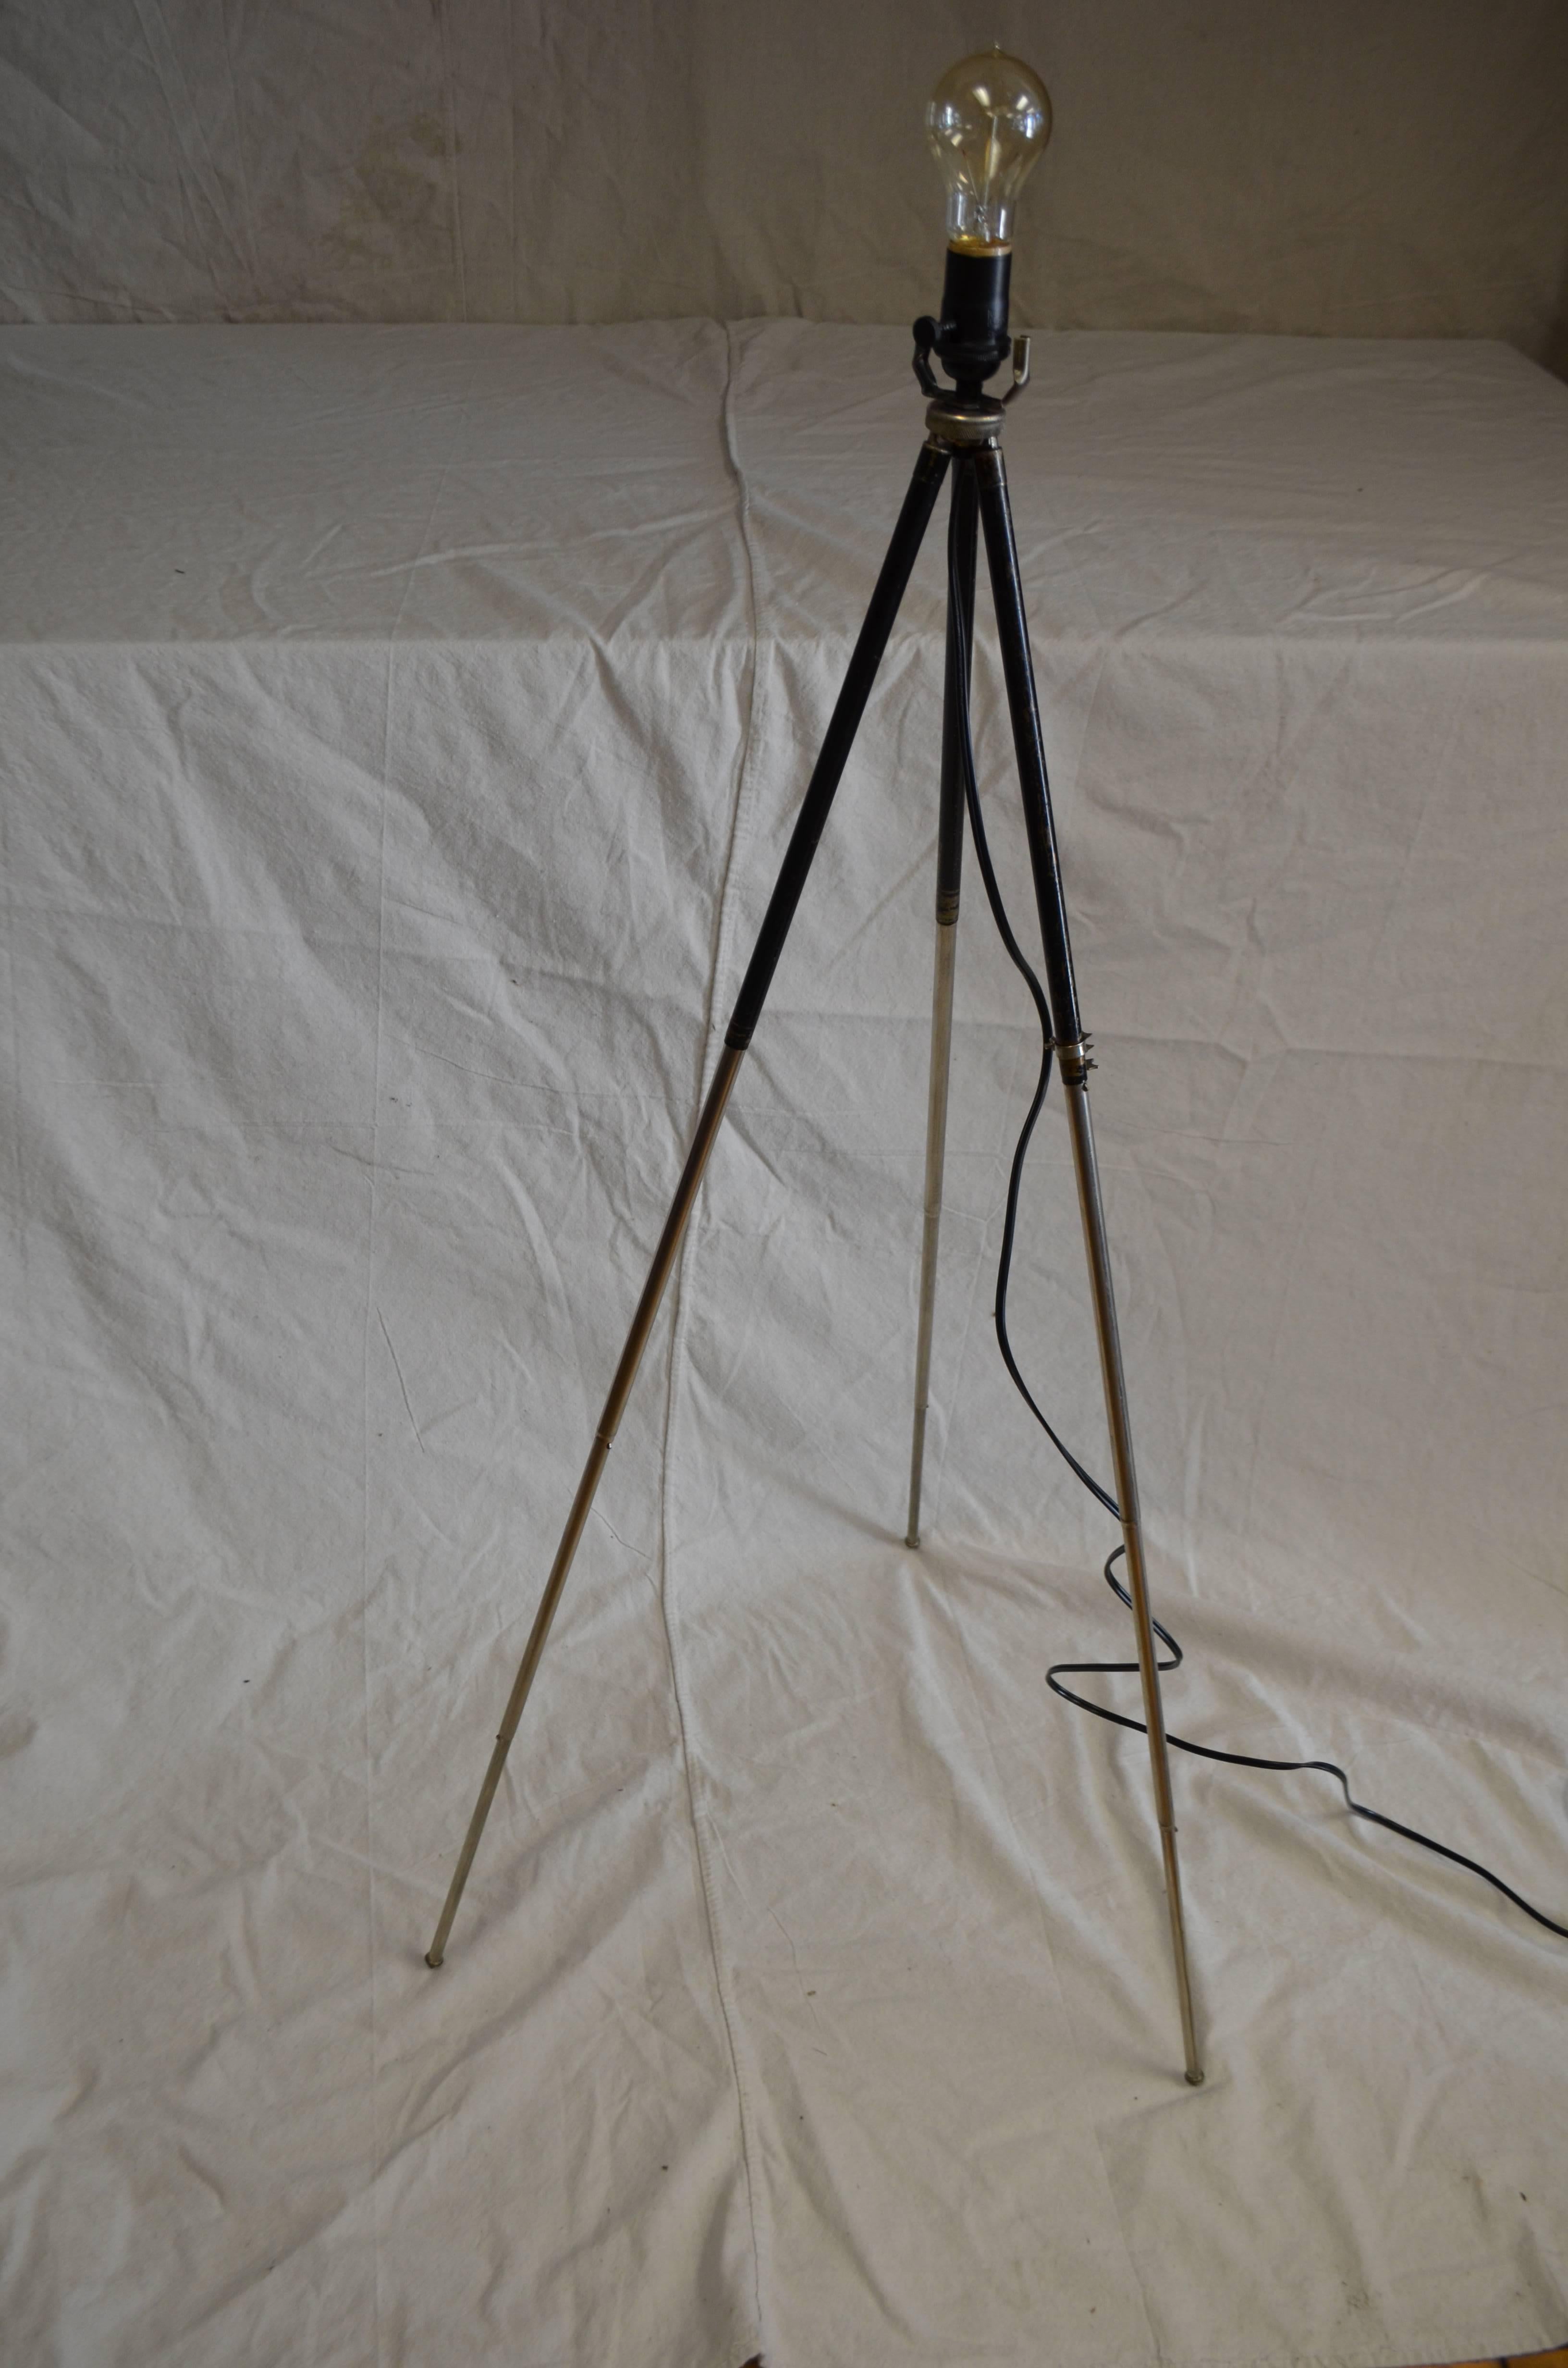 20th Century Lamp for Table or Floor Made from Photographer's Tripod